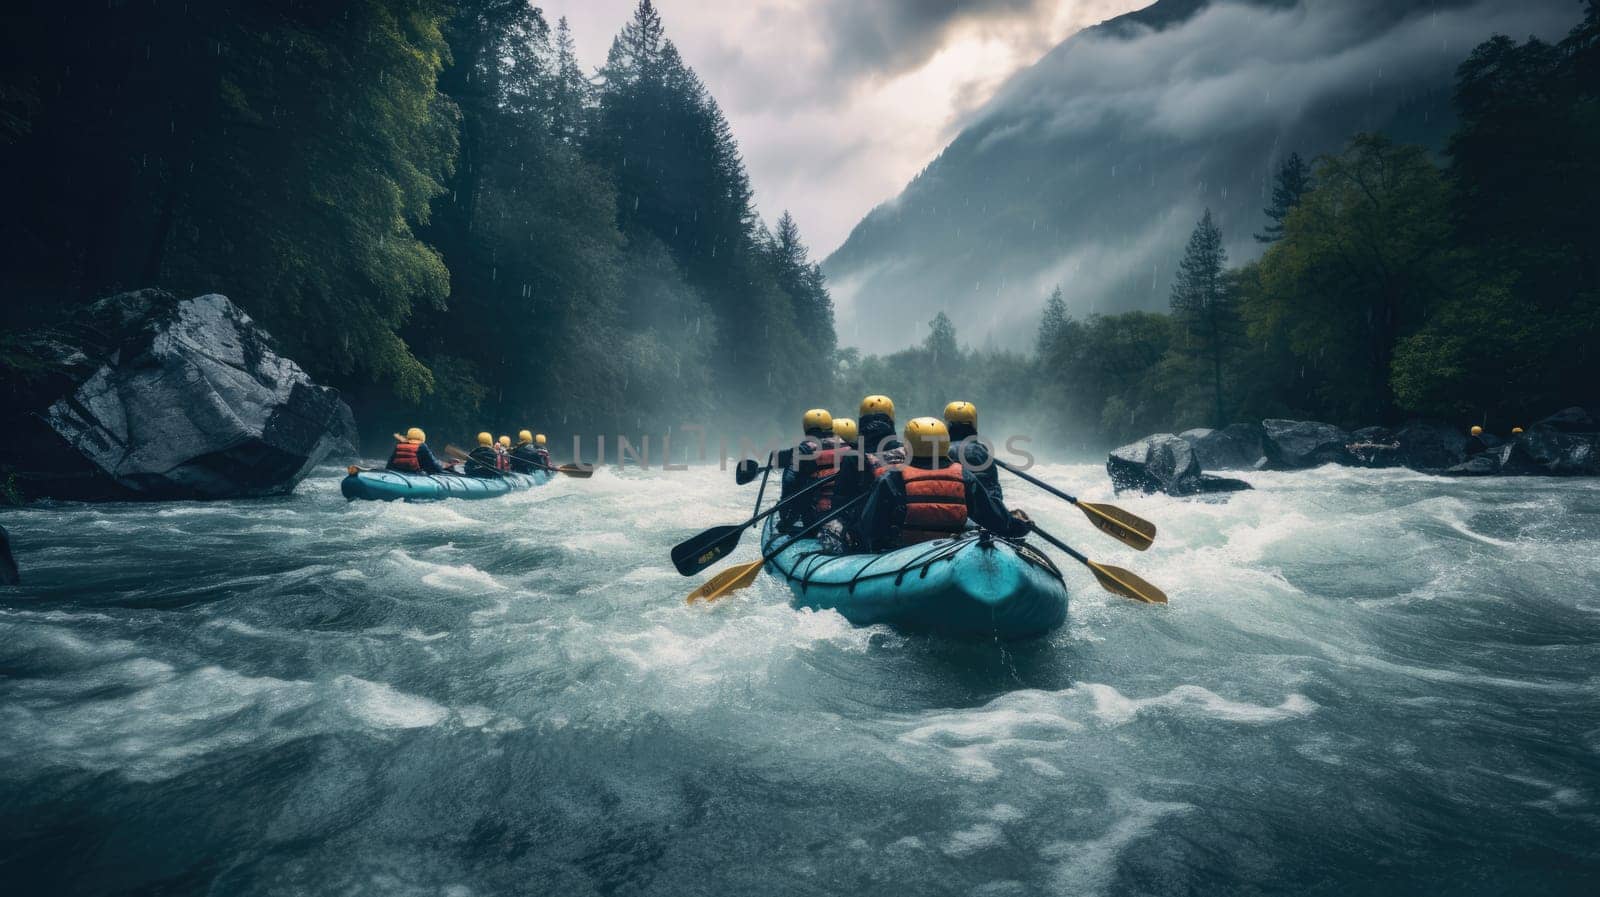 Group of travelers kayaking down a stormy river AI